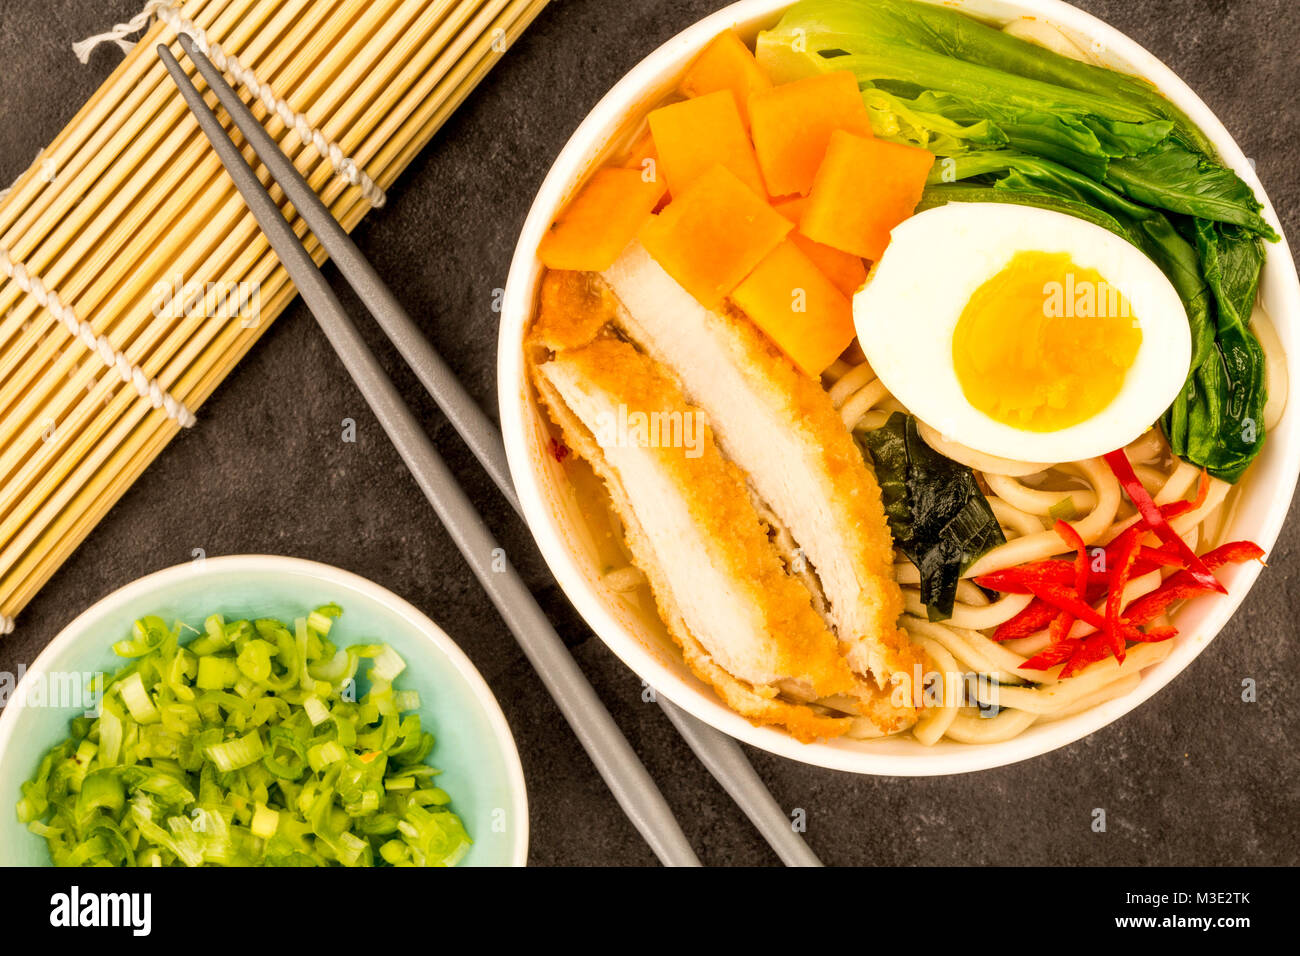 Japanese Style Panko Breadcrumbs Chicken And Noodle Broth or Soup With Sweet Potatoes Against A Black Tile Backgorund Stock Photo